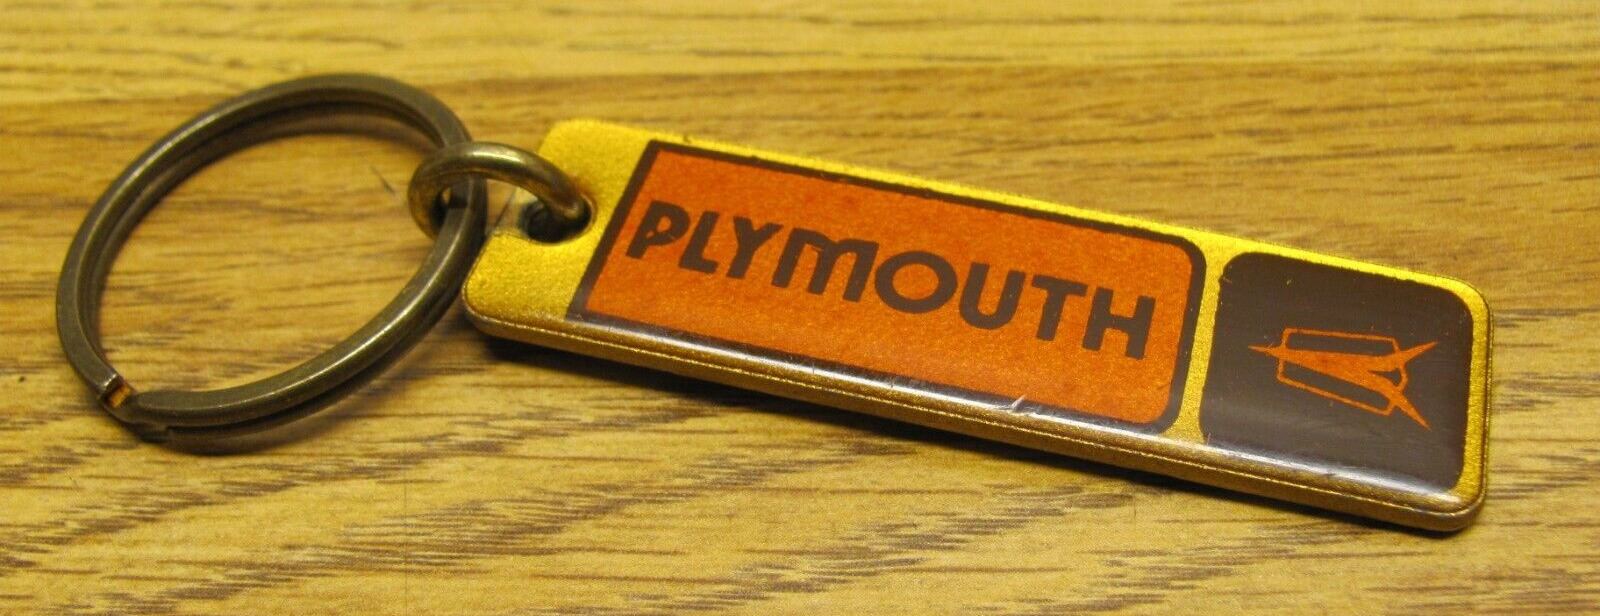 Vintage PLYMOUTH Key Ring Key Chain Key Carrier